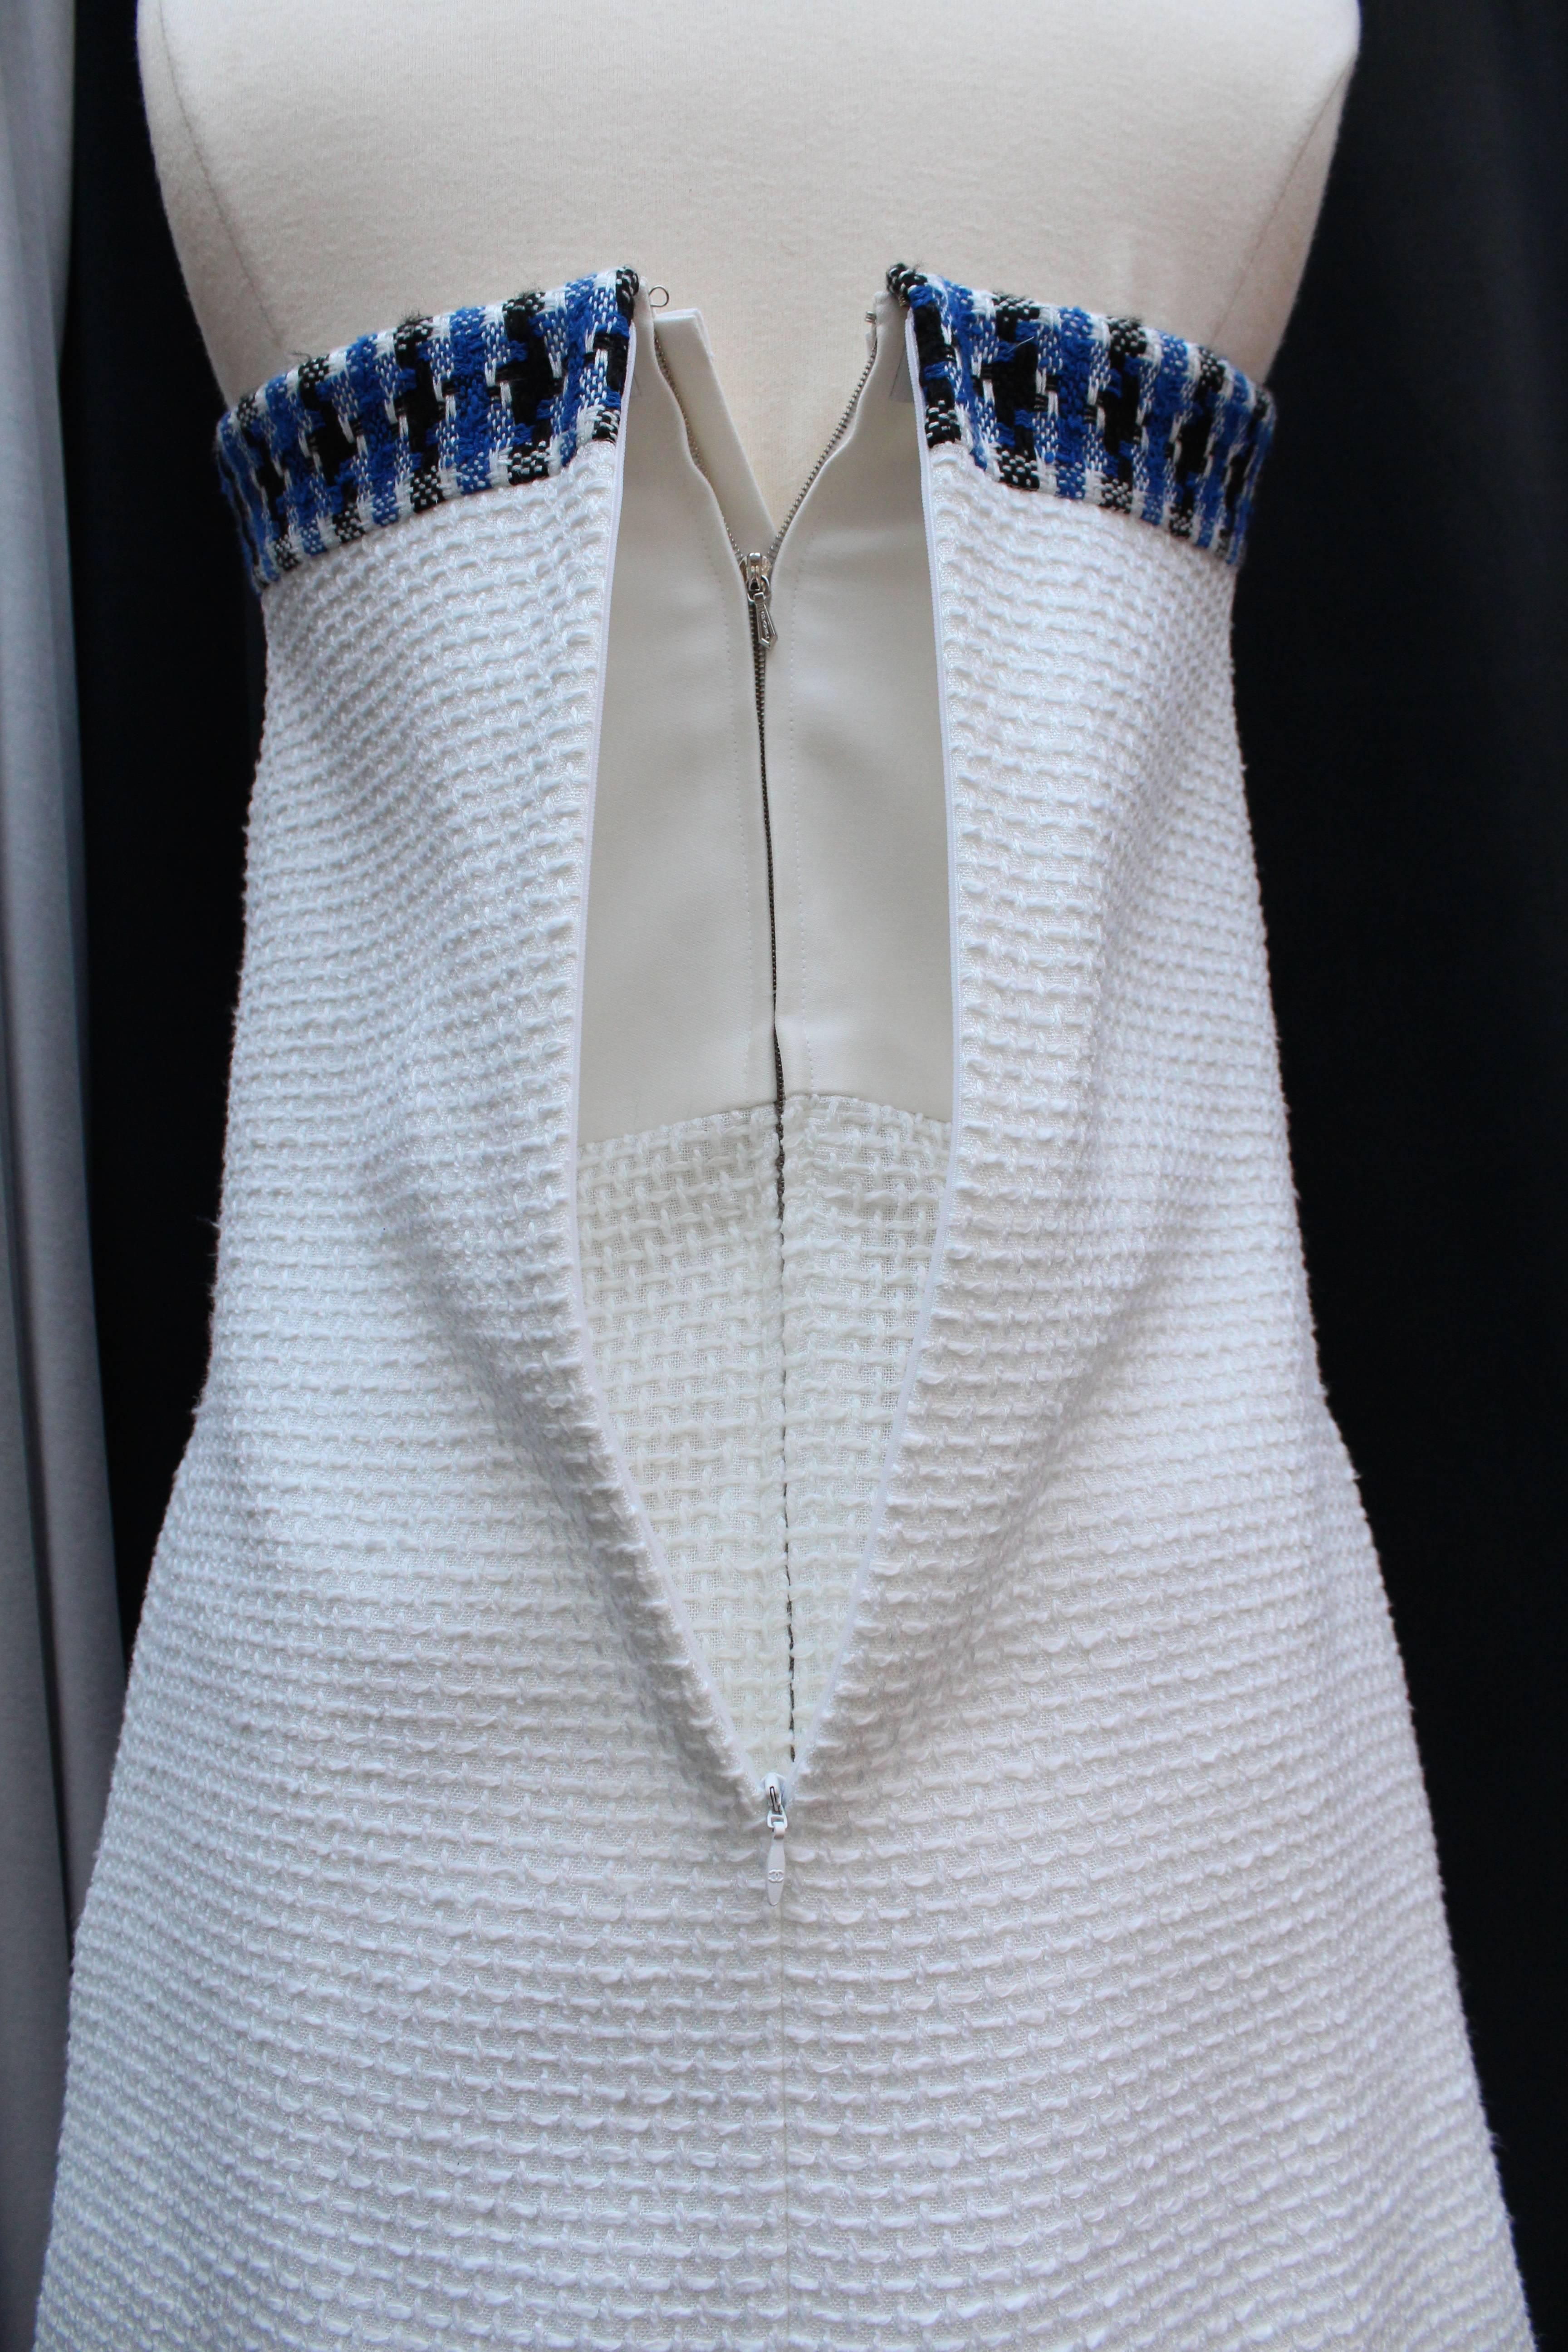 2013 Chanel Strapless Dress in White Blue and Black Cotton 3